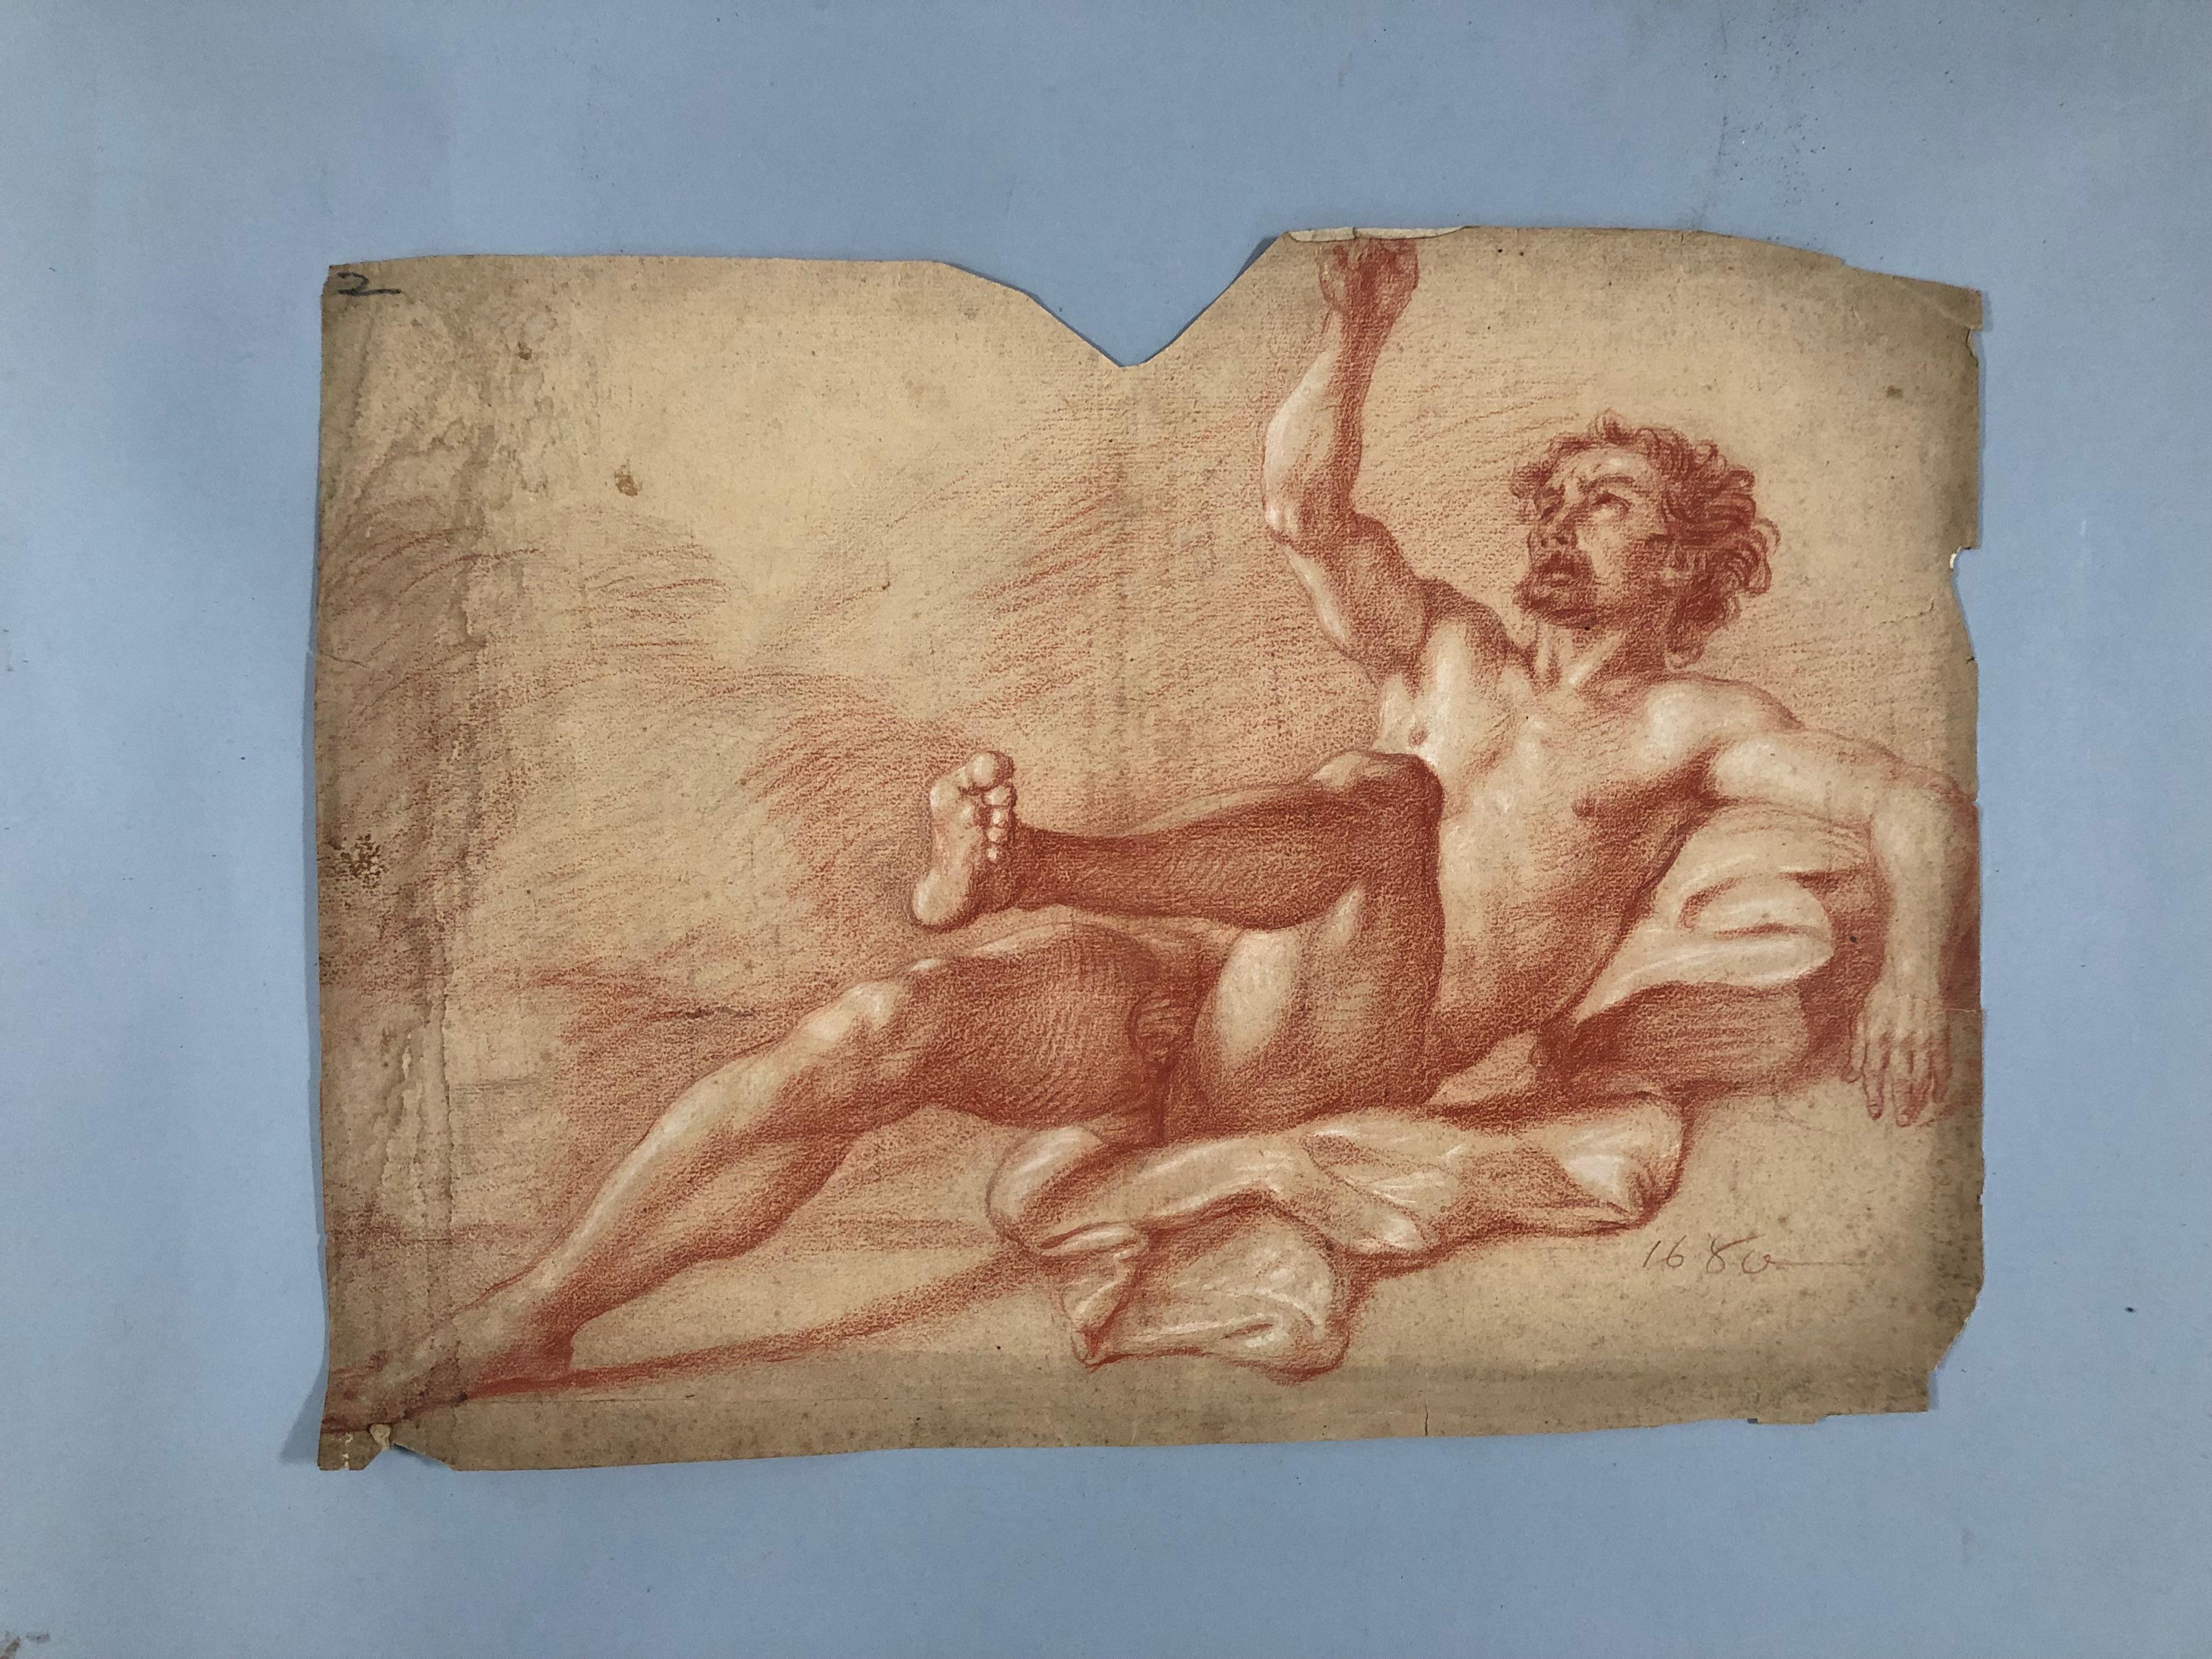 FRENCH SCHOOL 17th Century. Study of a naked man. Sanguine. Dated 1680 - Art by Unknown